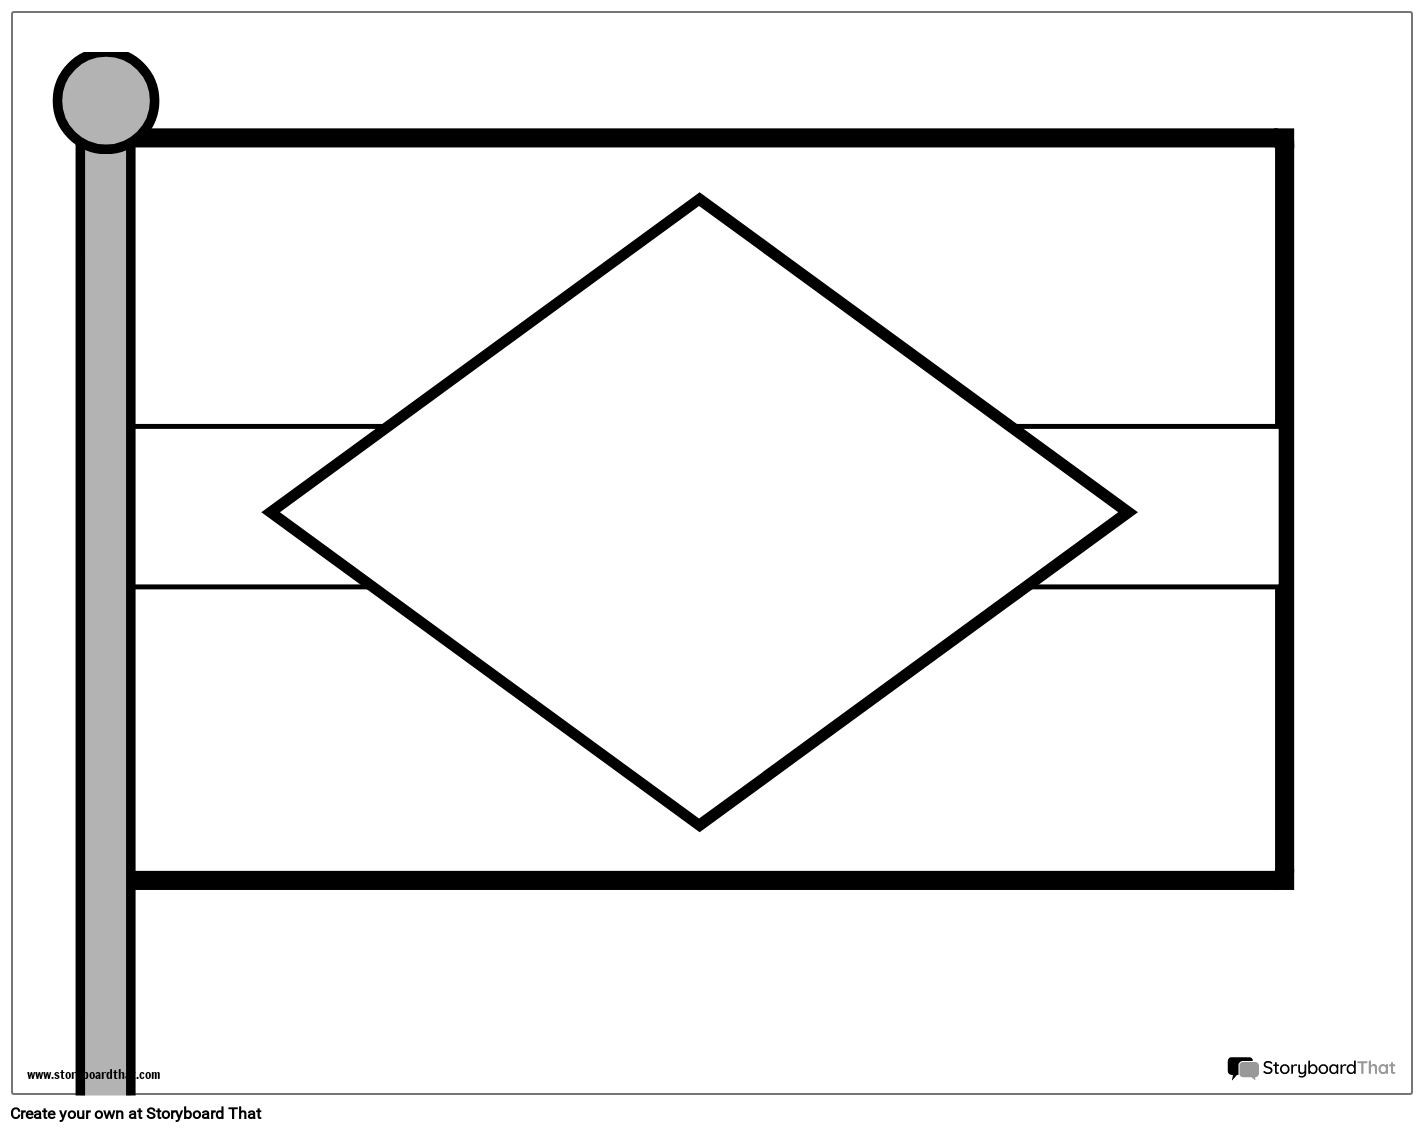 Flag Worksheet with a Simple Drawn Flag